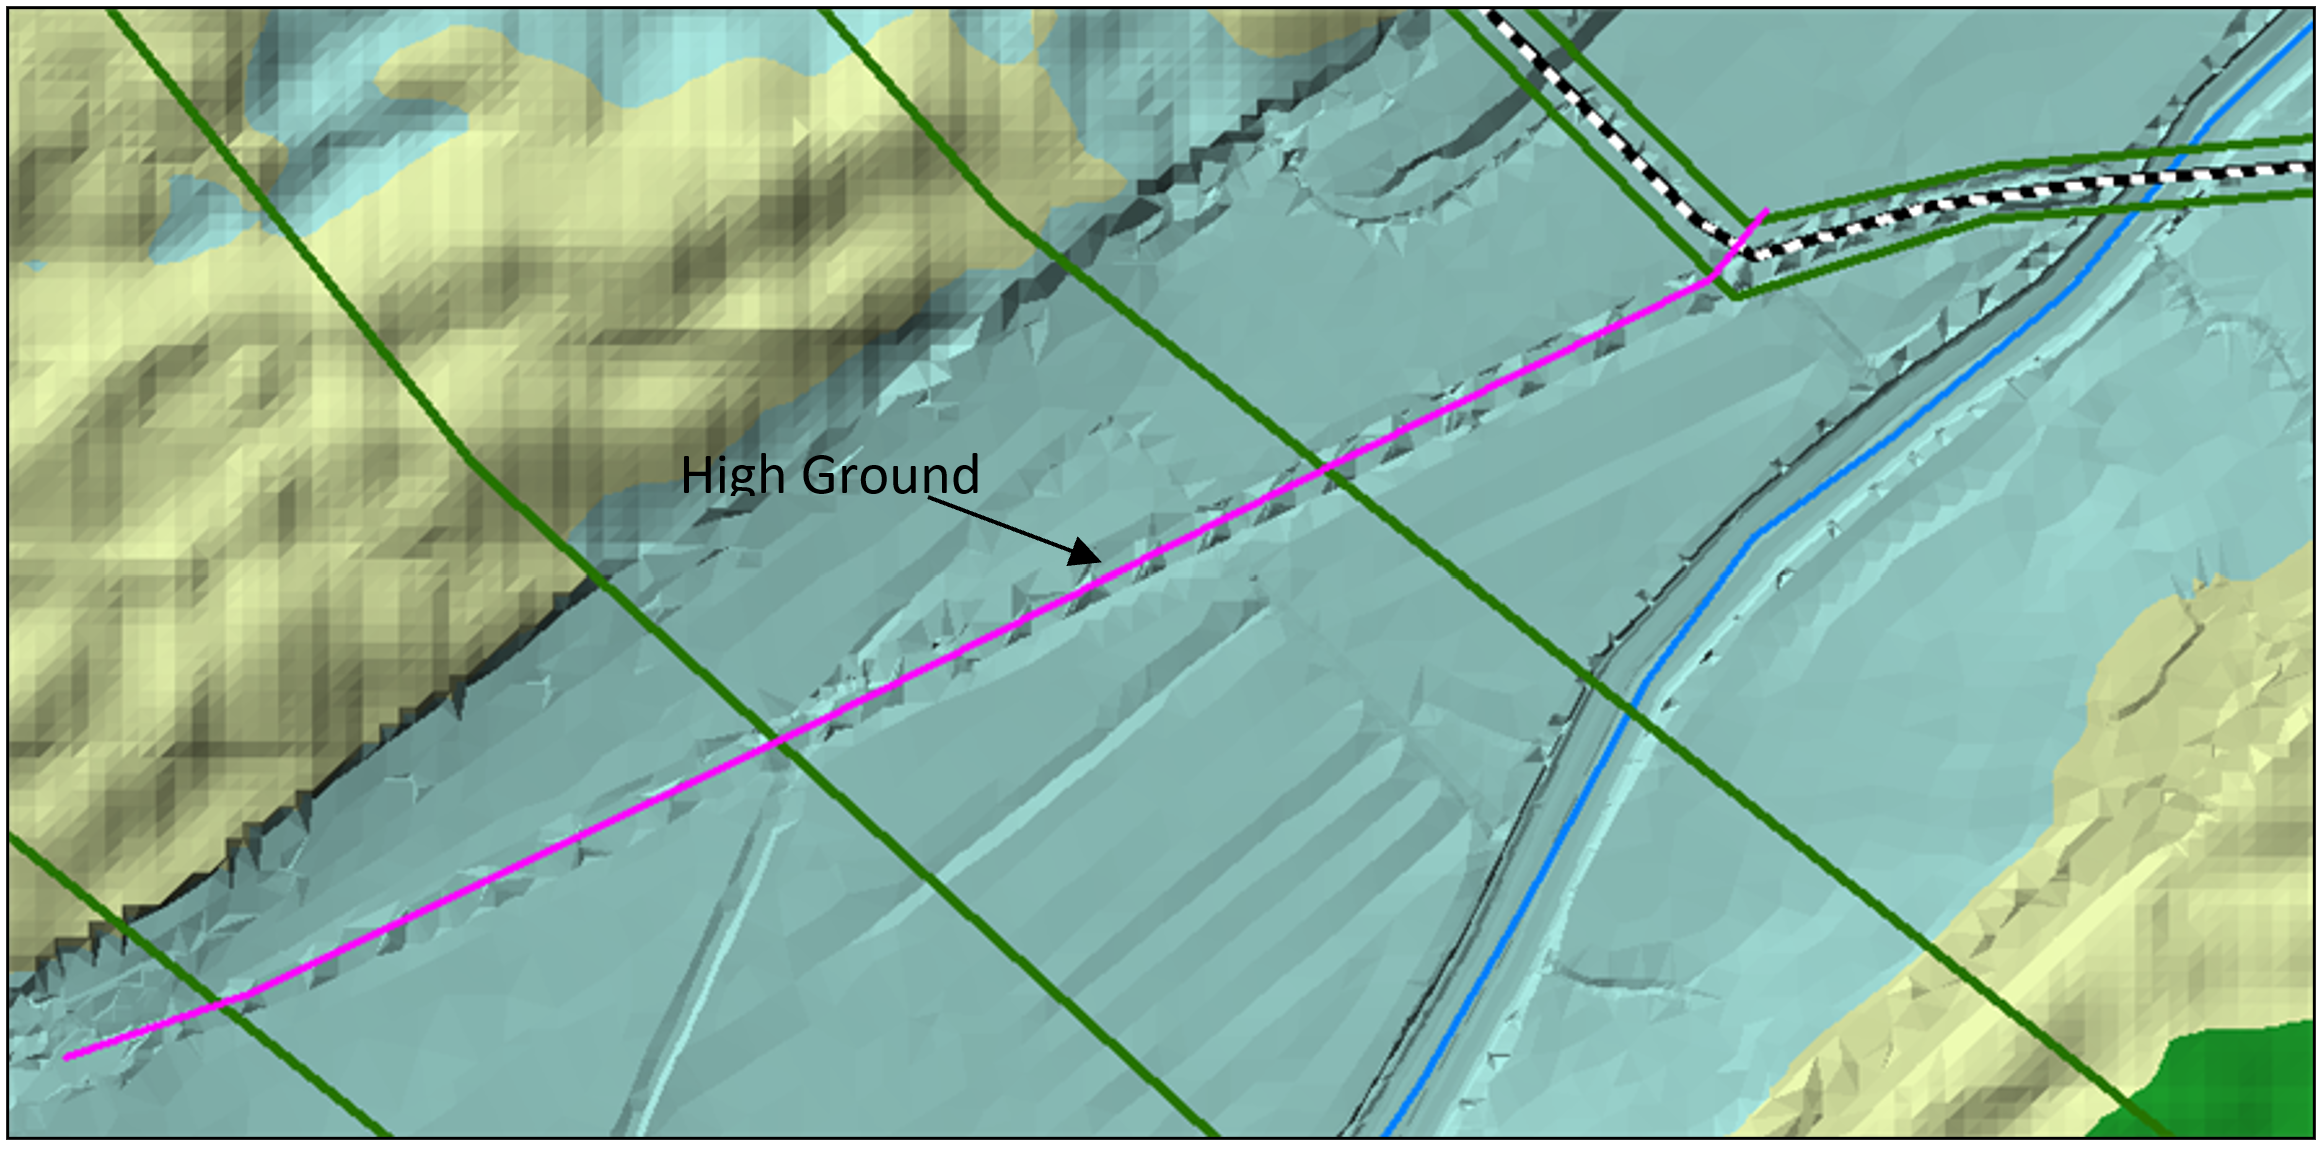 High ground (road or levee) represented as part of the cross sections.